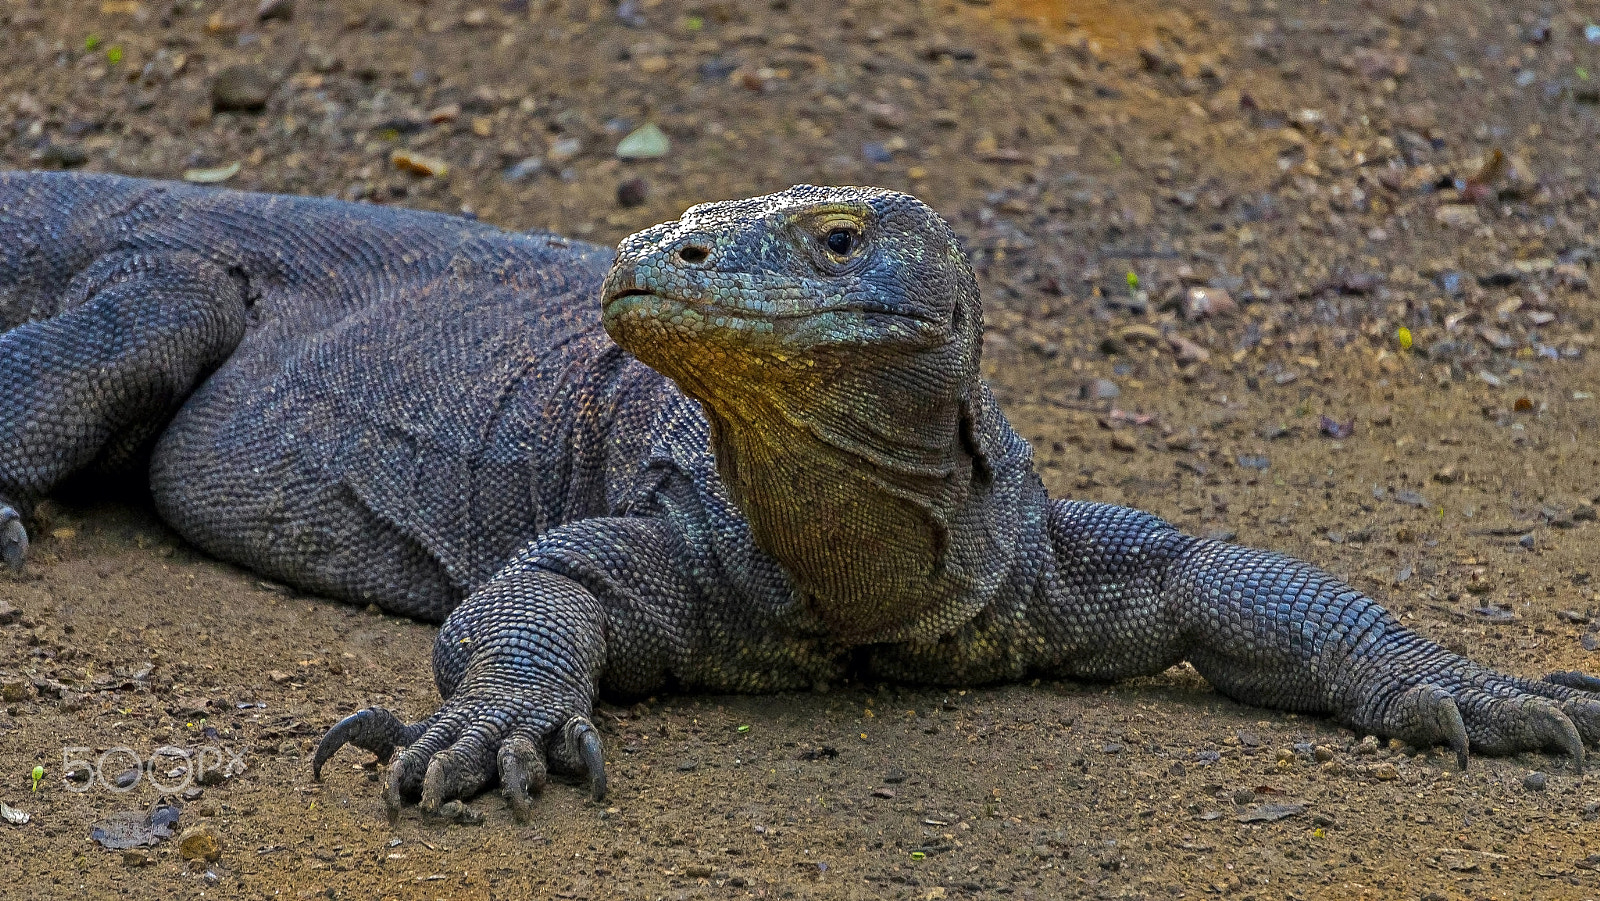 Sony a7 sample photo. Komodo dragon close up and personal photography